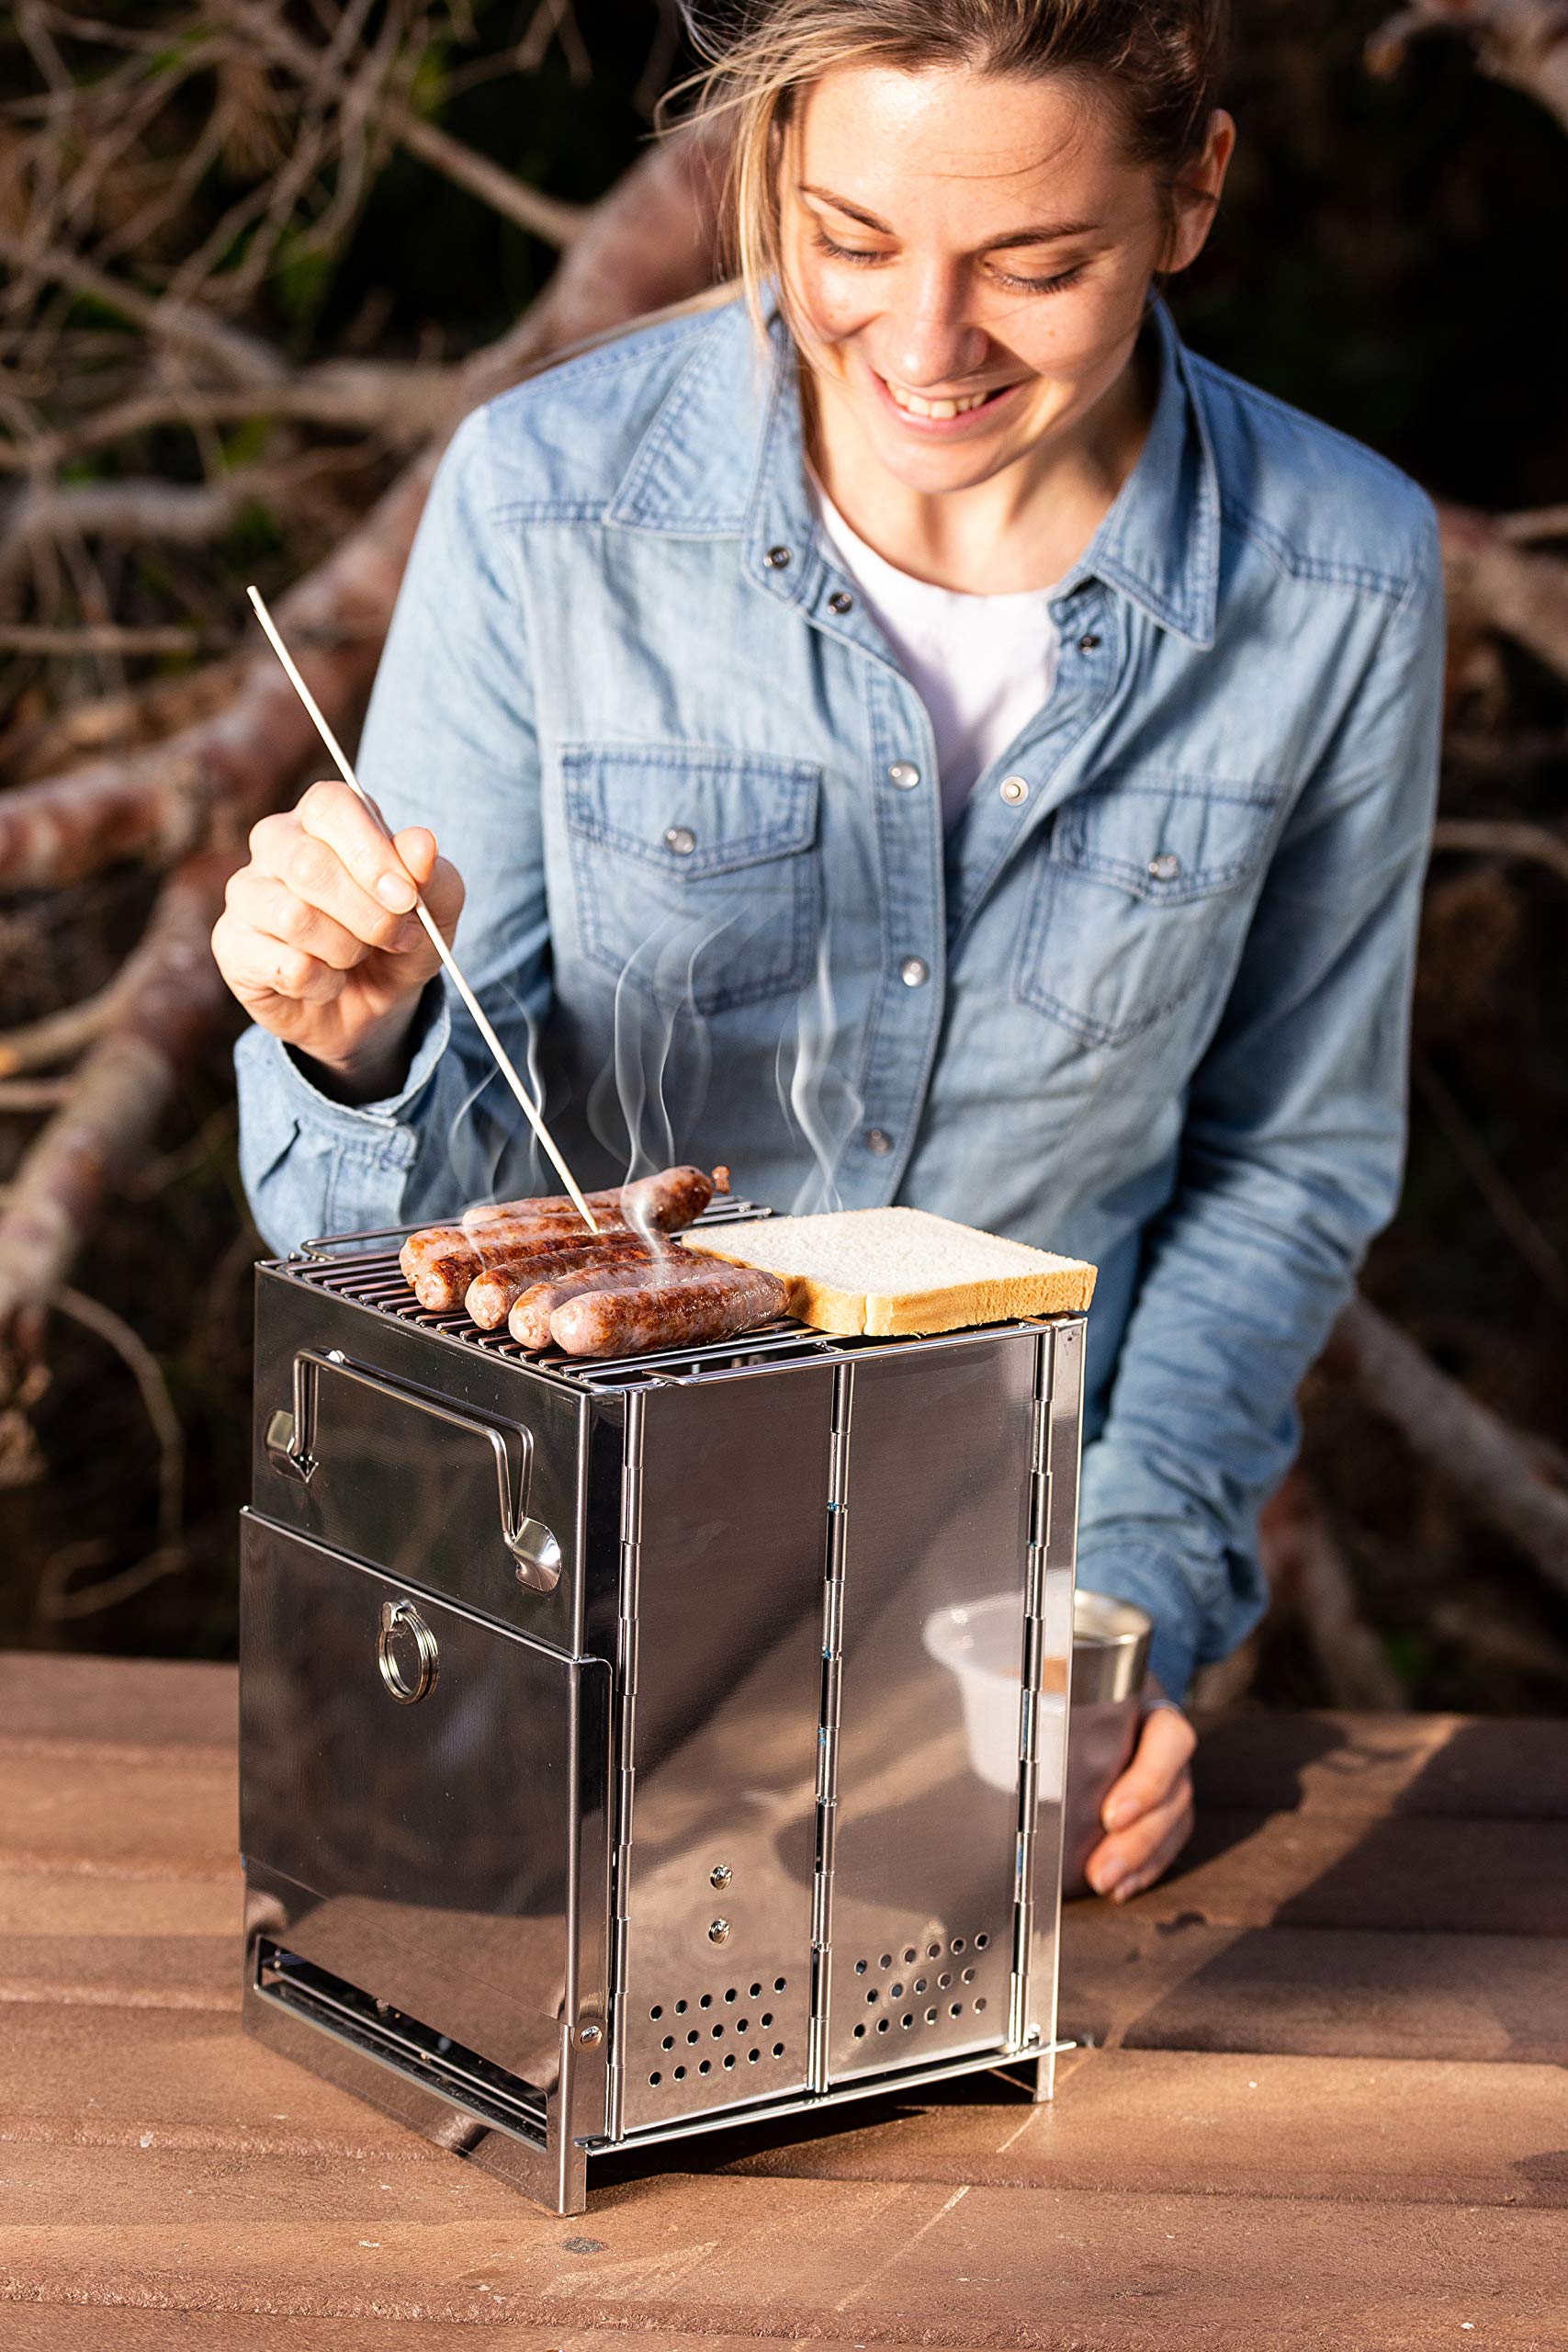 Zento Deals Wood Burning Folding Camp Stove, Stainless Steel, Foldable Grill Survival, Easy to Carry, Large Portable Backpacking for Hiking Camping and BBQ, for Grilling, Cooking, and Reheating